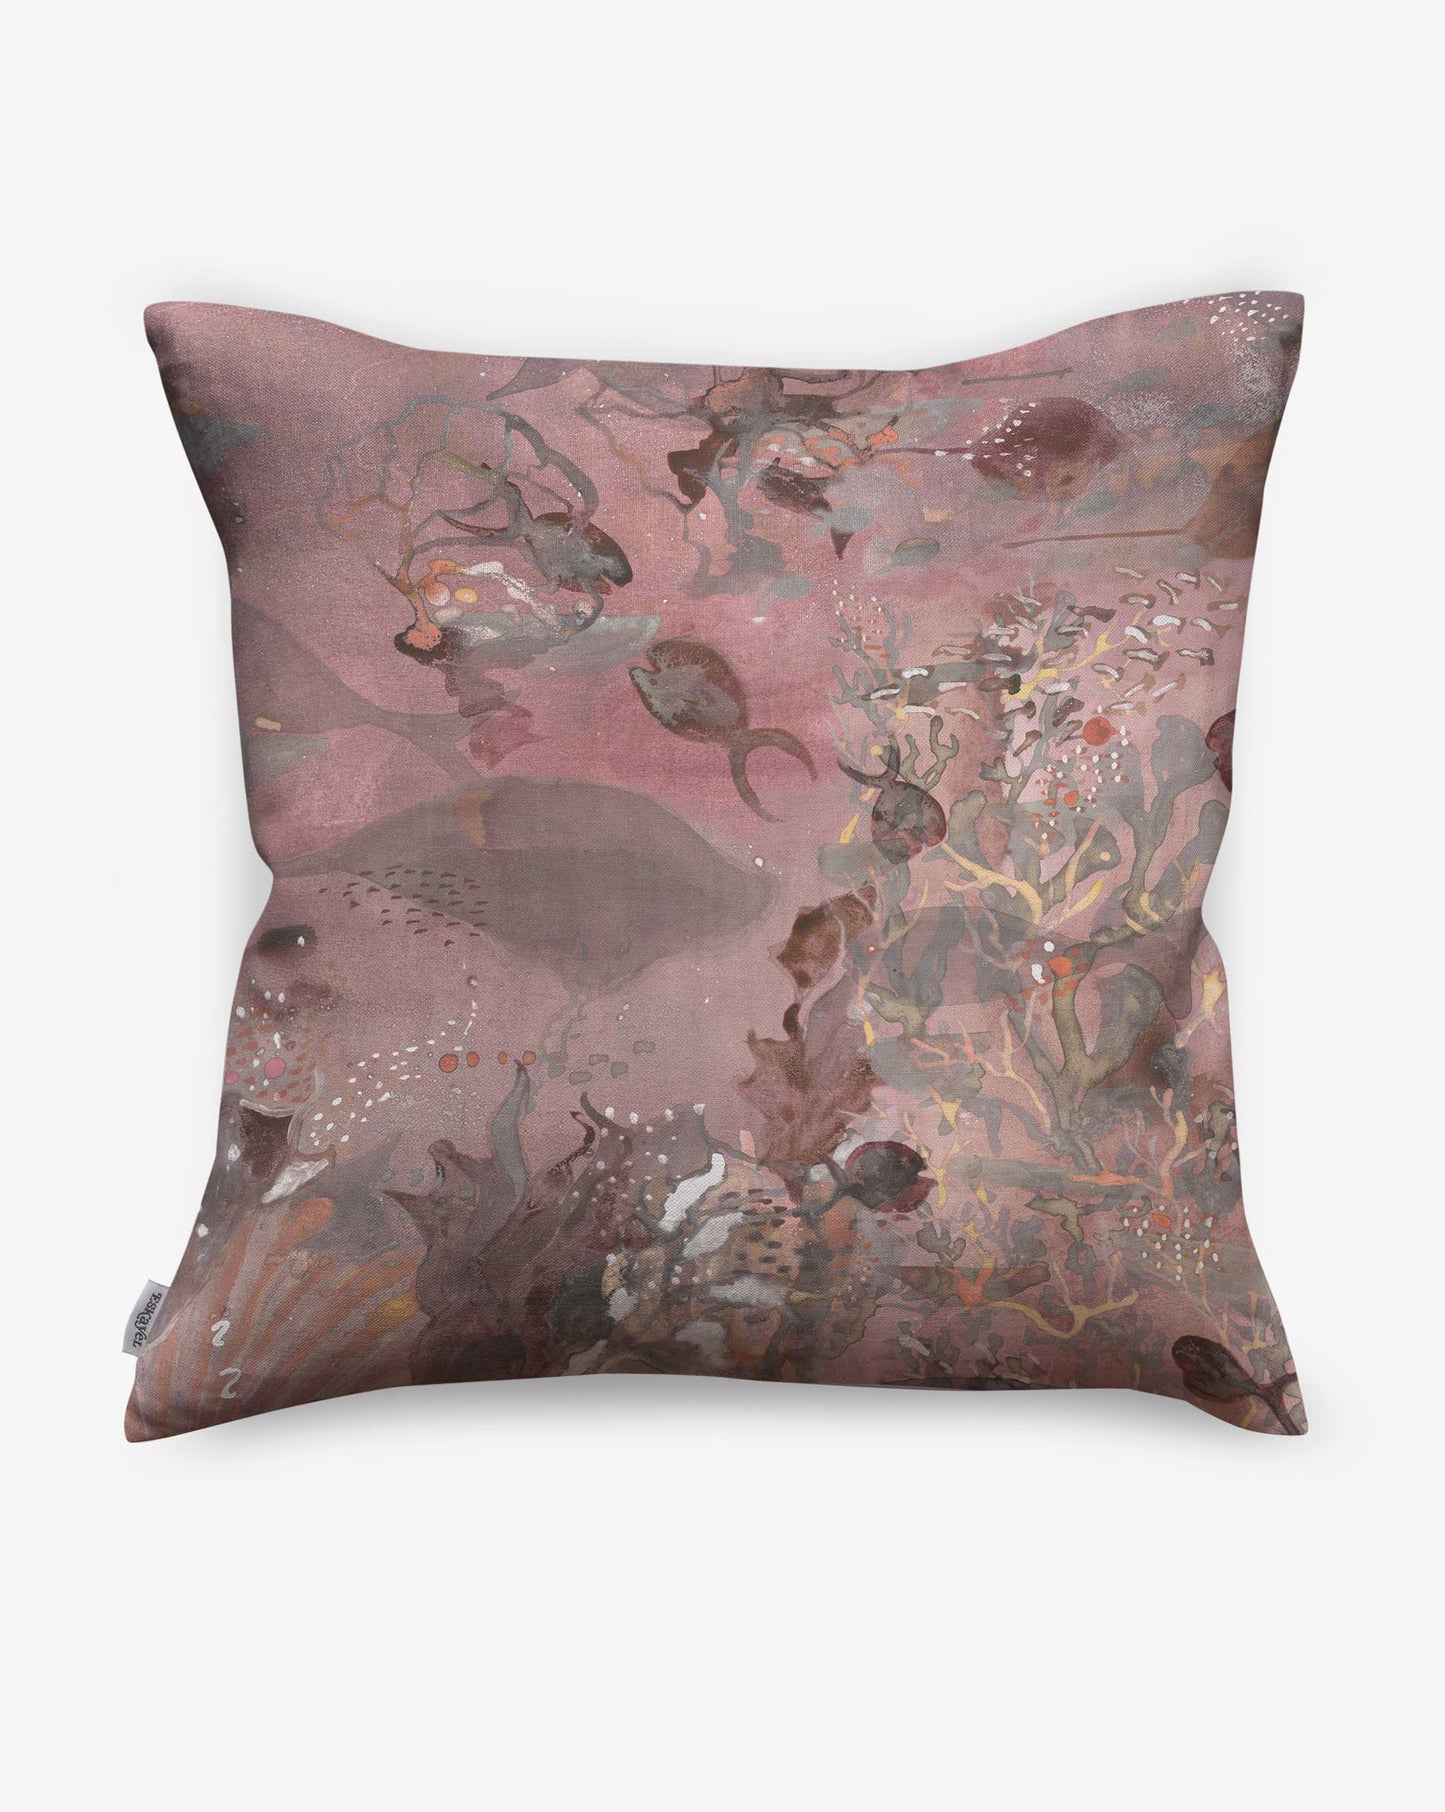 Atoll pillows by Eskayel in the Coral colorway incorporate beautiful pink and red tones.